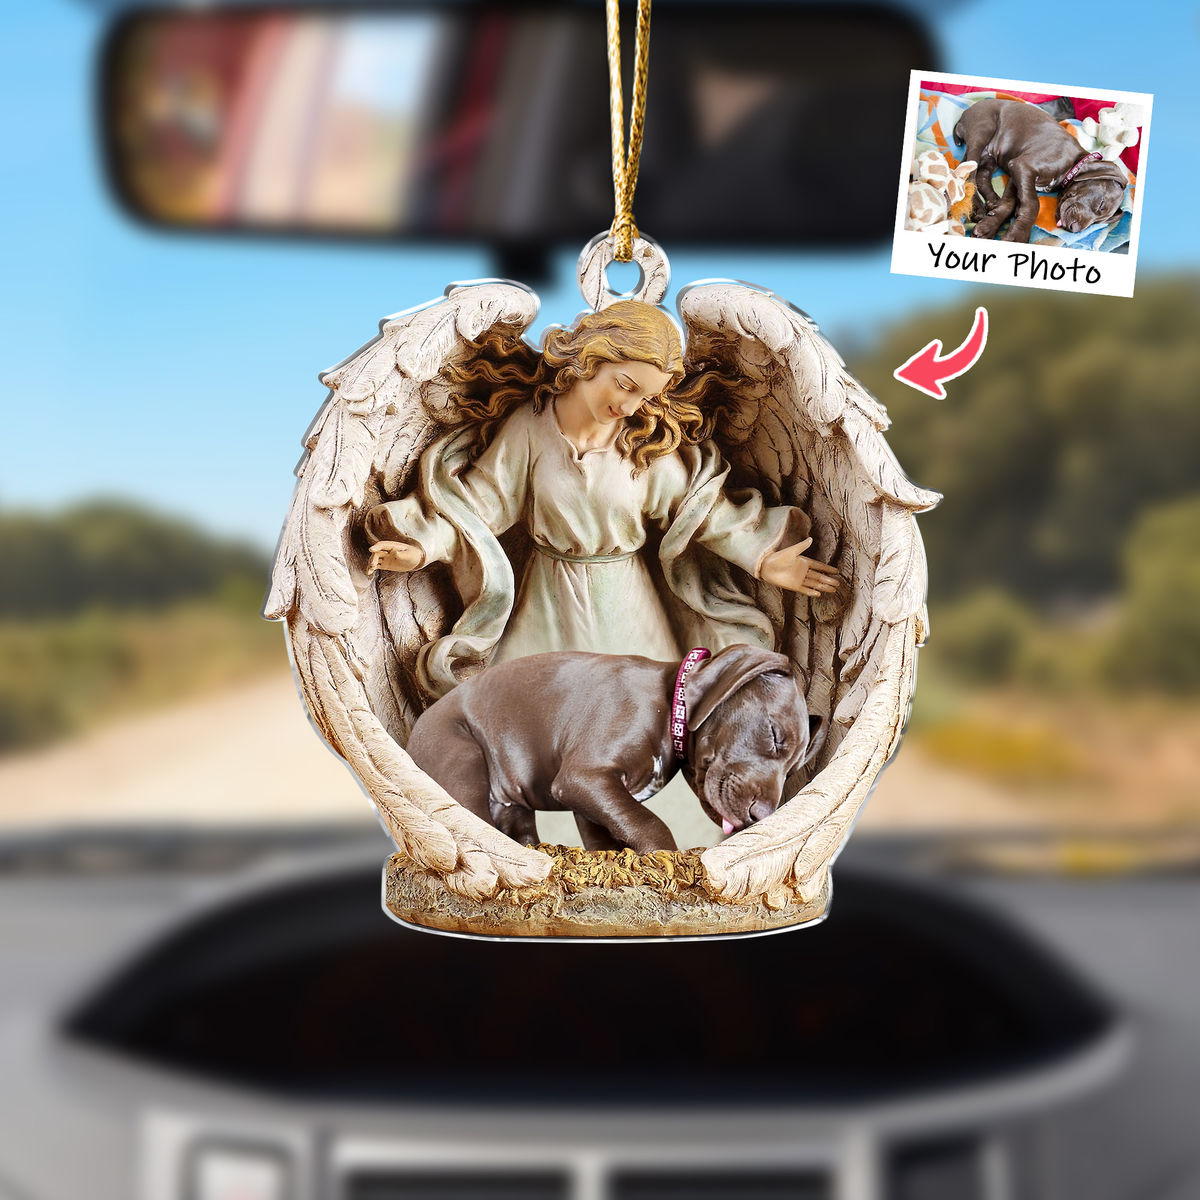 Dog Acrylic Ornament - Dog Lover Gifts - Sleeping Pet Within Angel Wings - Custom Ornament from Photo - v3_2